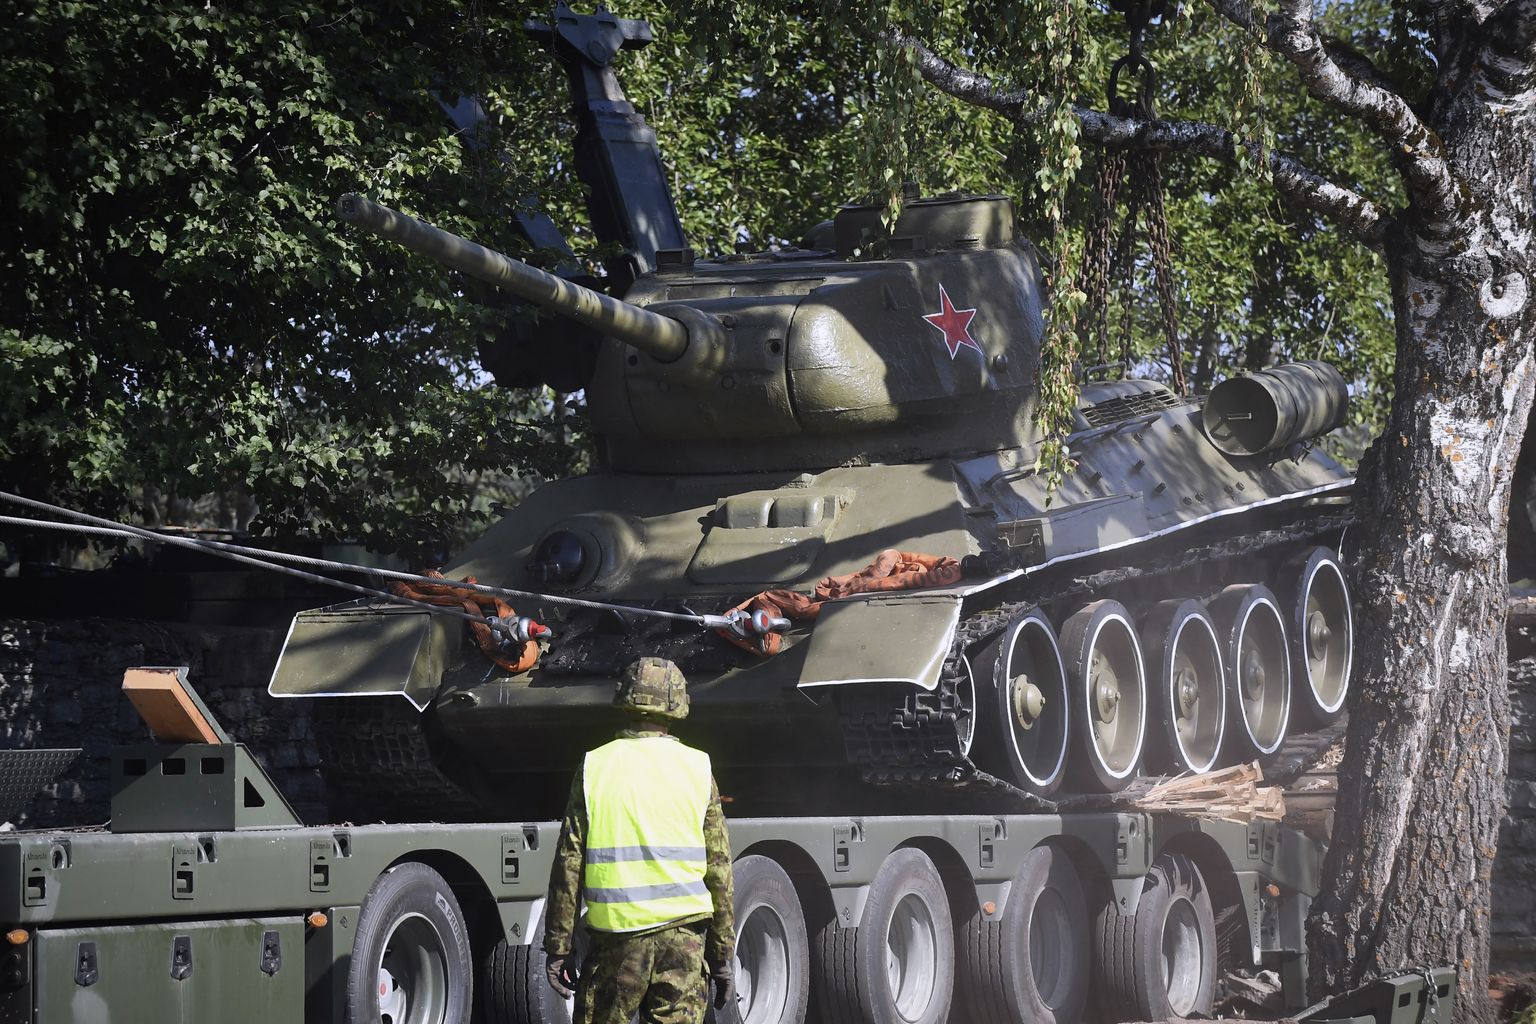 A Soviet T-34 tank installed as a monument is removed from its pedestal in Narva, Estonia, Tuesday, Aug. 16, 2022.